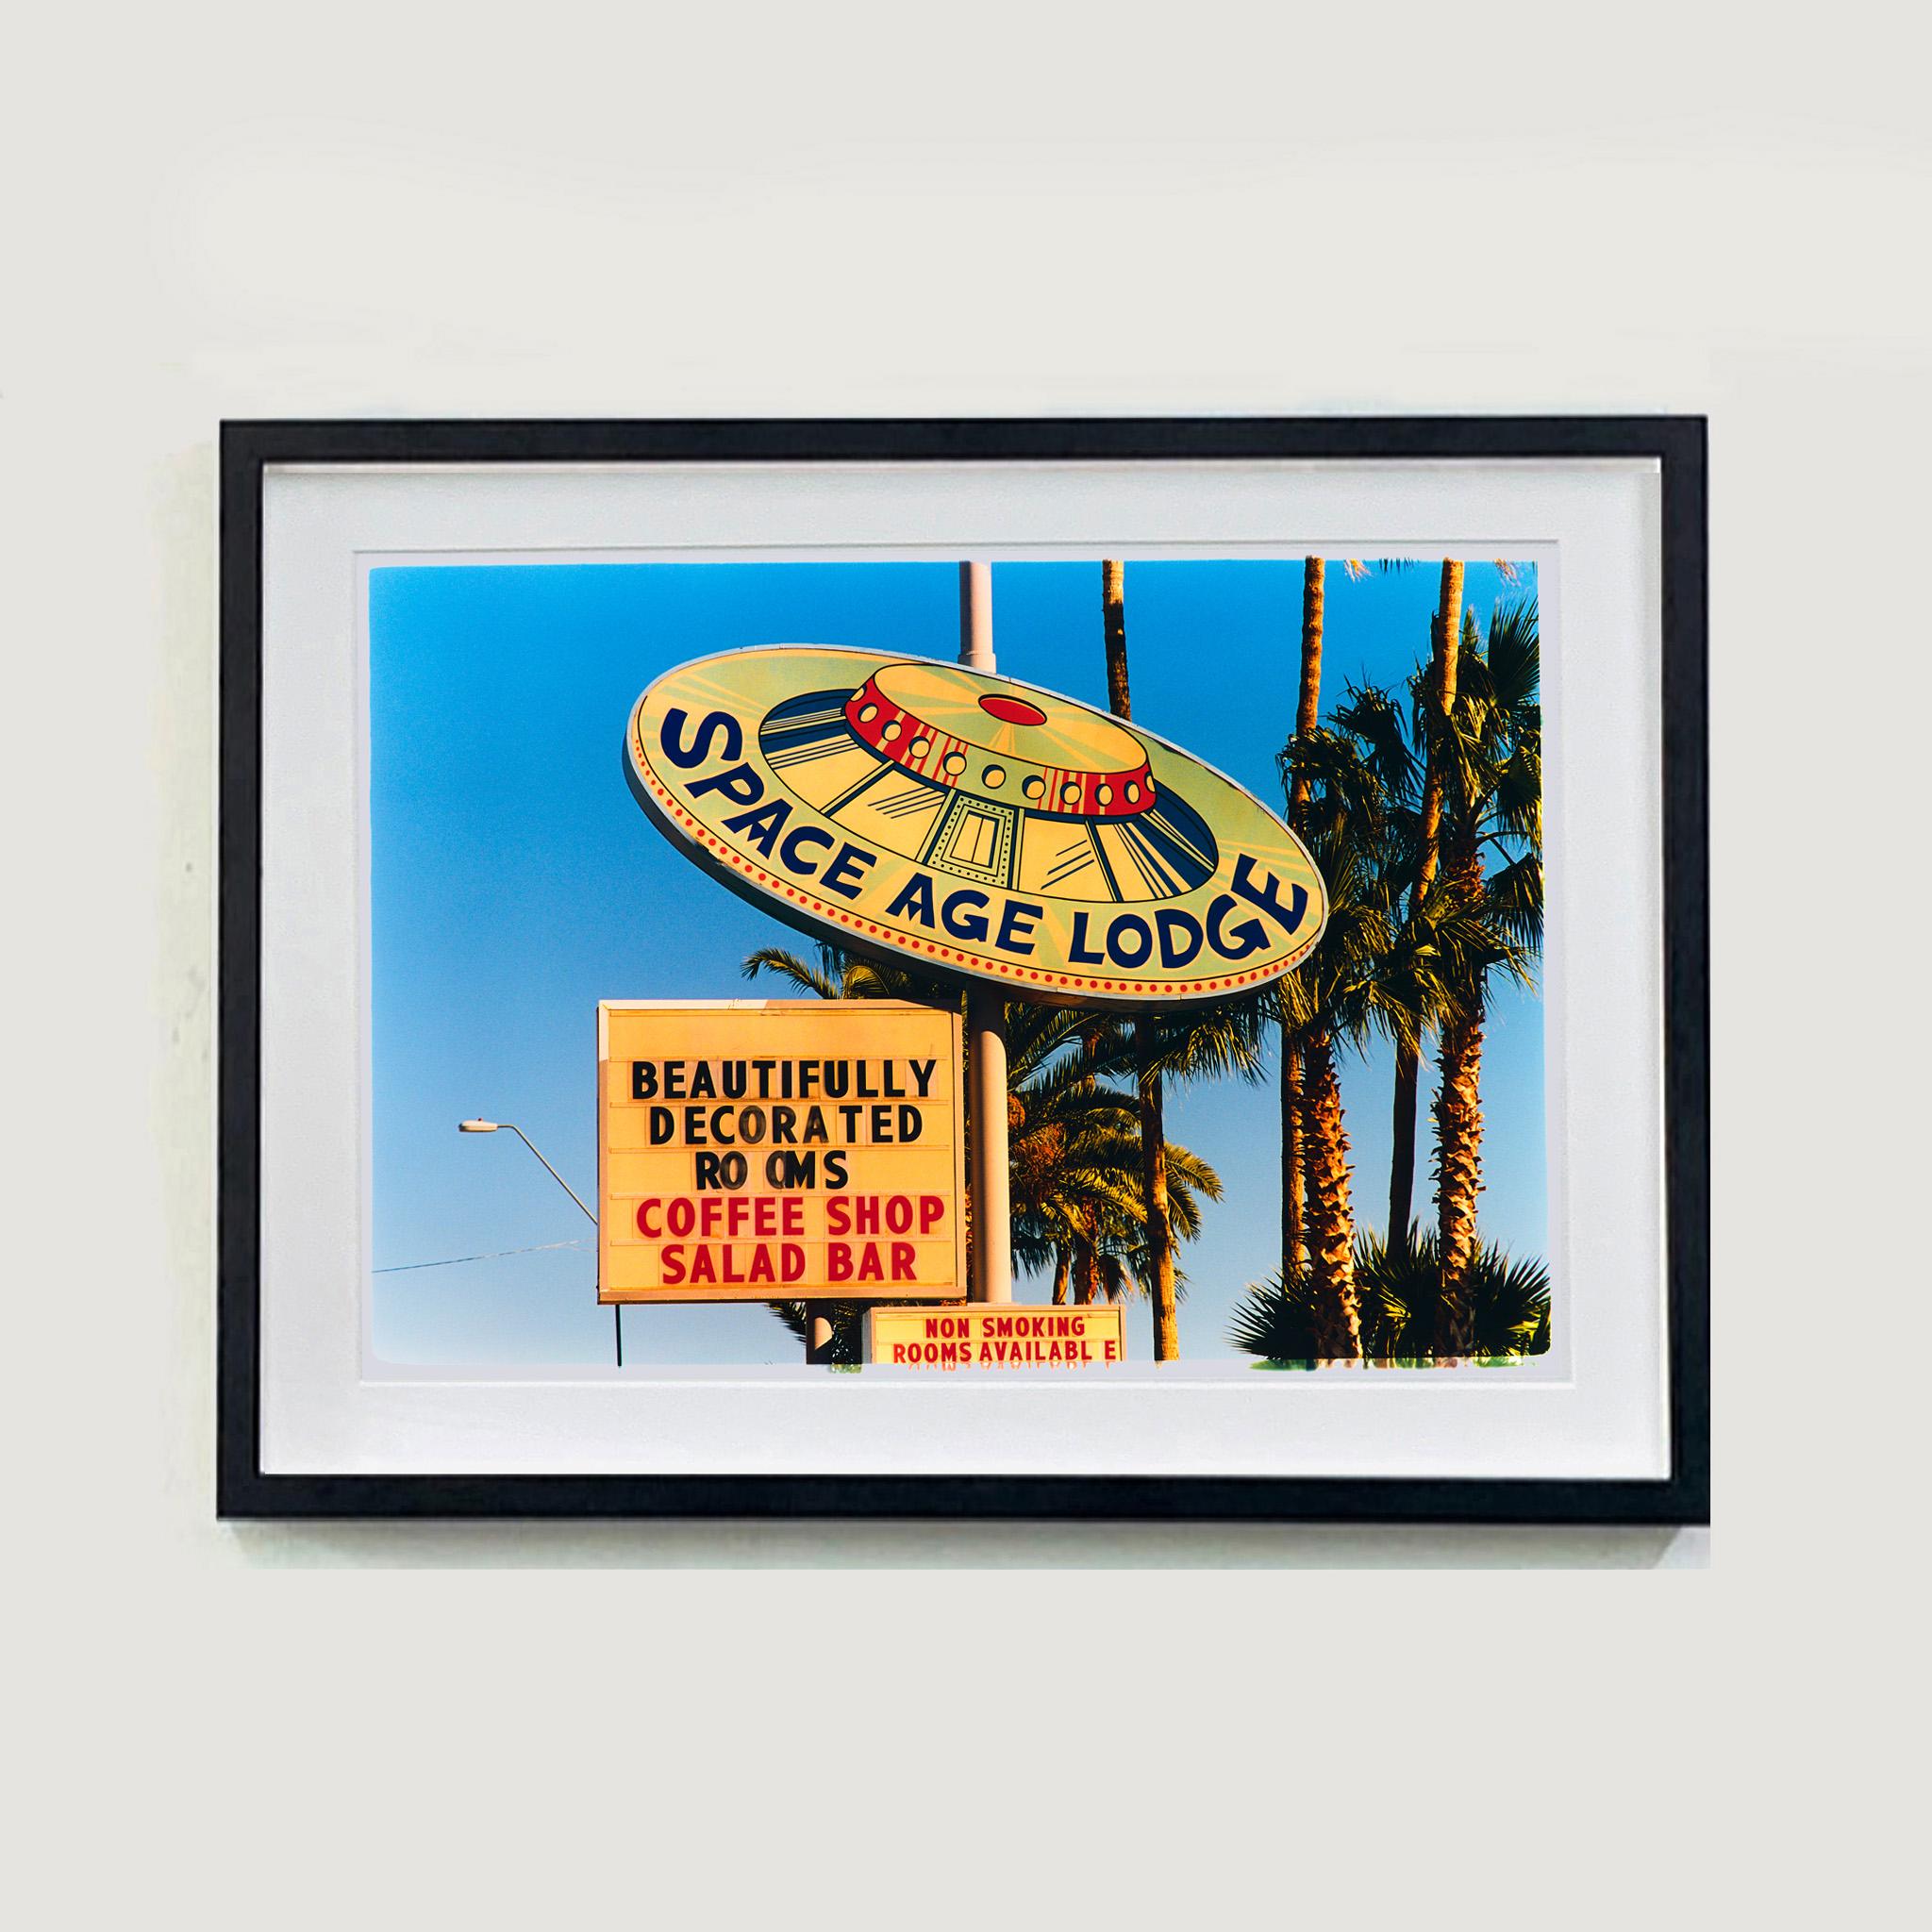 Googie sign photography at its finest, the iconic and memorable Space Age Lodge, in Gila Bend, Arizona. Photograph by Richard Heeps from his Dream in Colour series, looking like a painting rather than a photograph.

This artwork is a limited edition